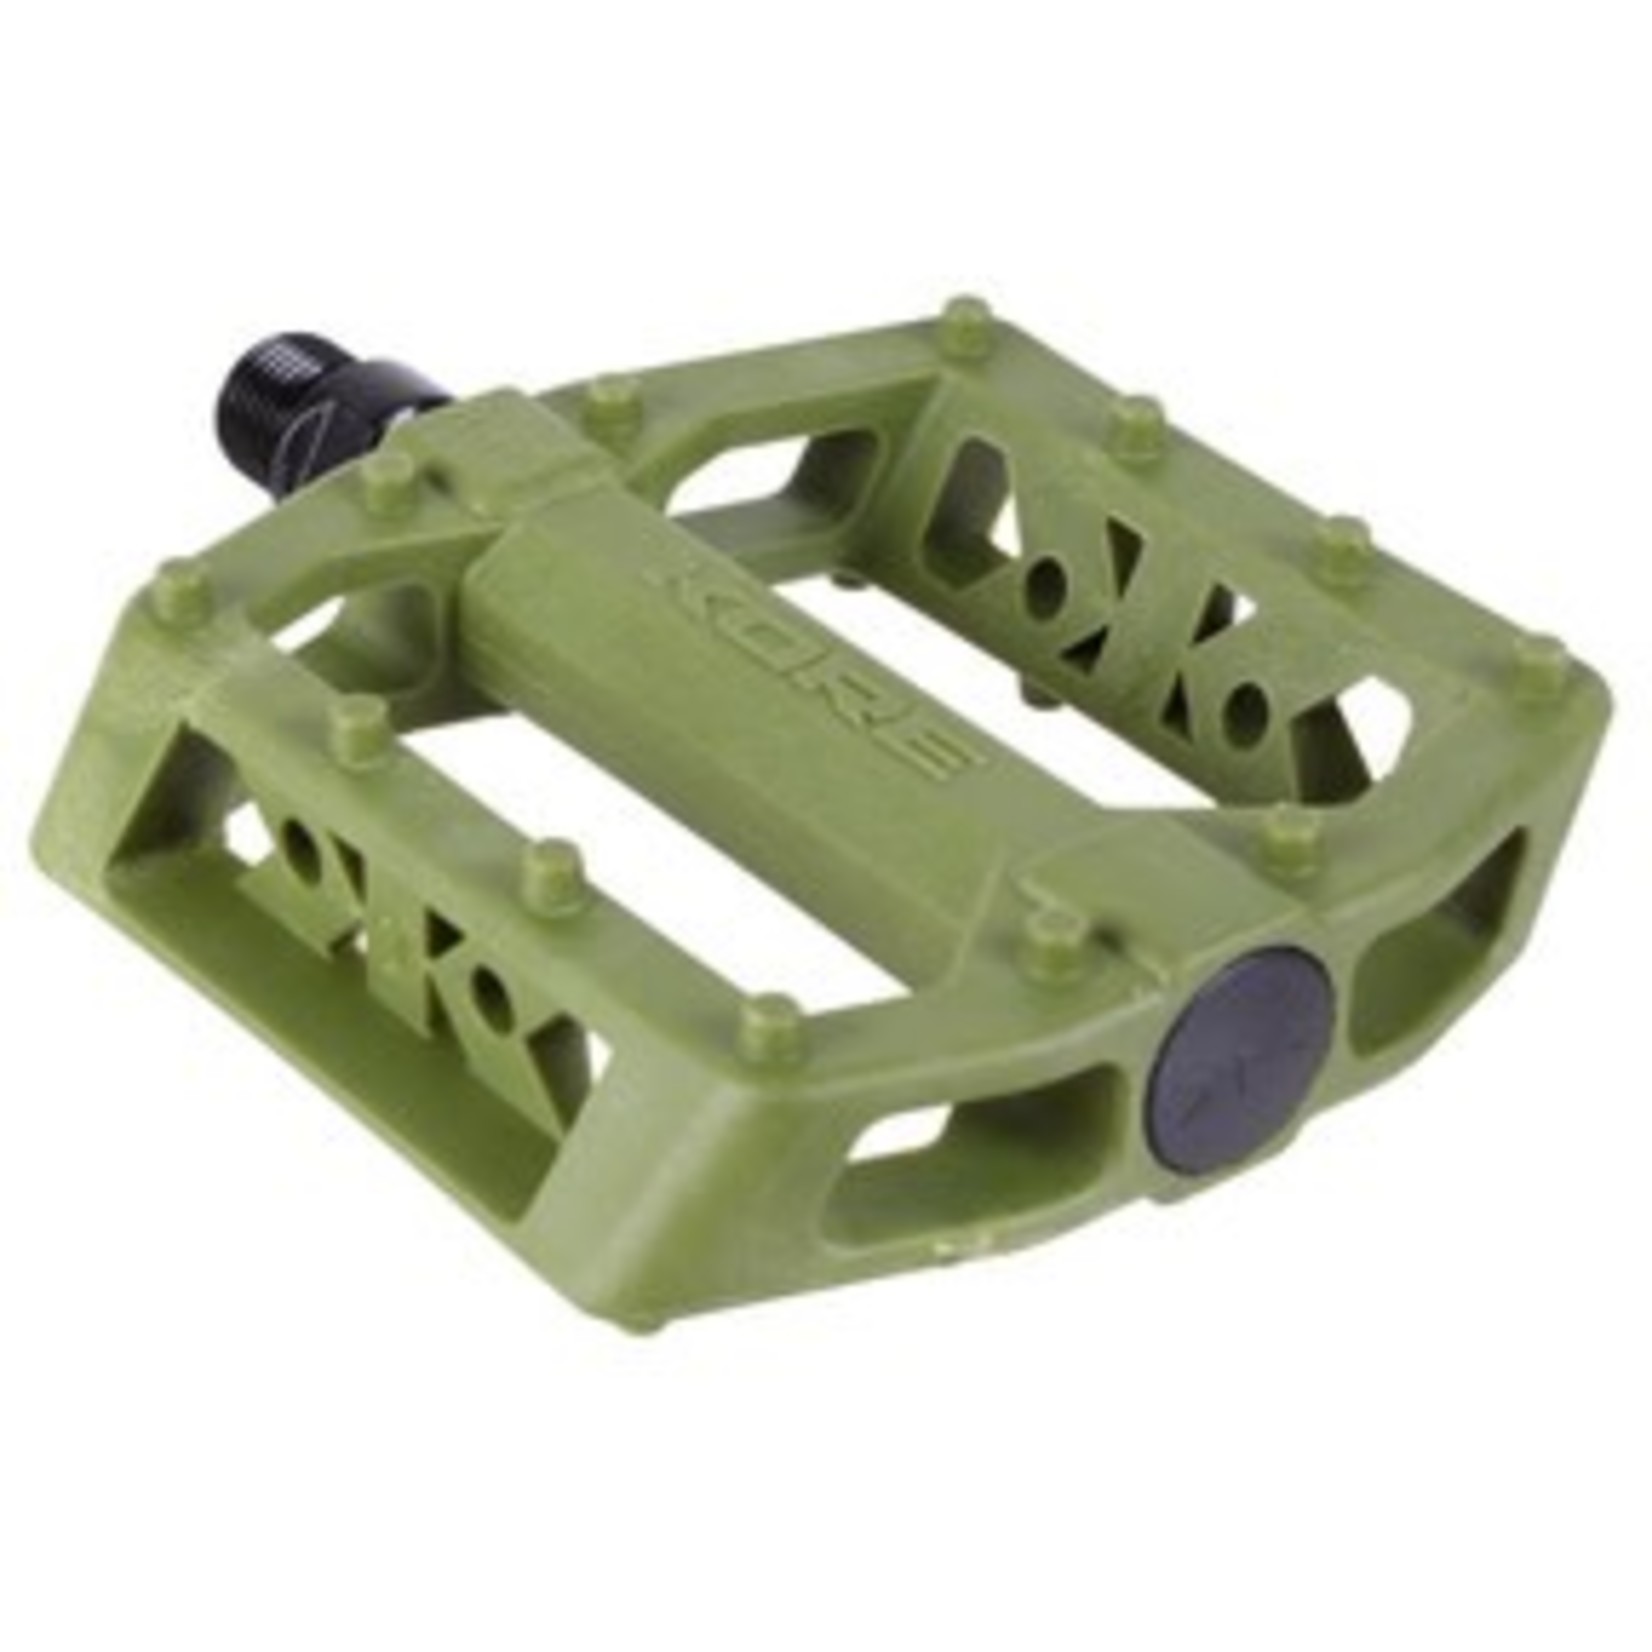 KORE Kore Rivera Thermo platform pedals, army green